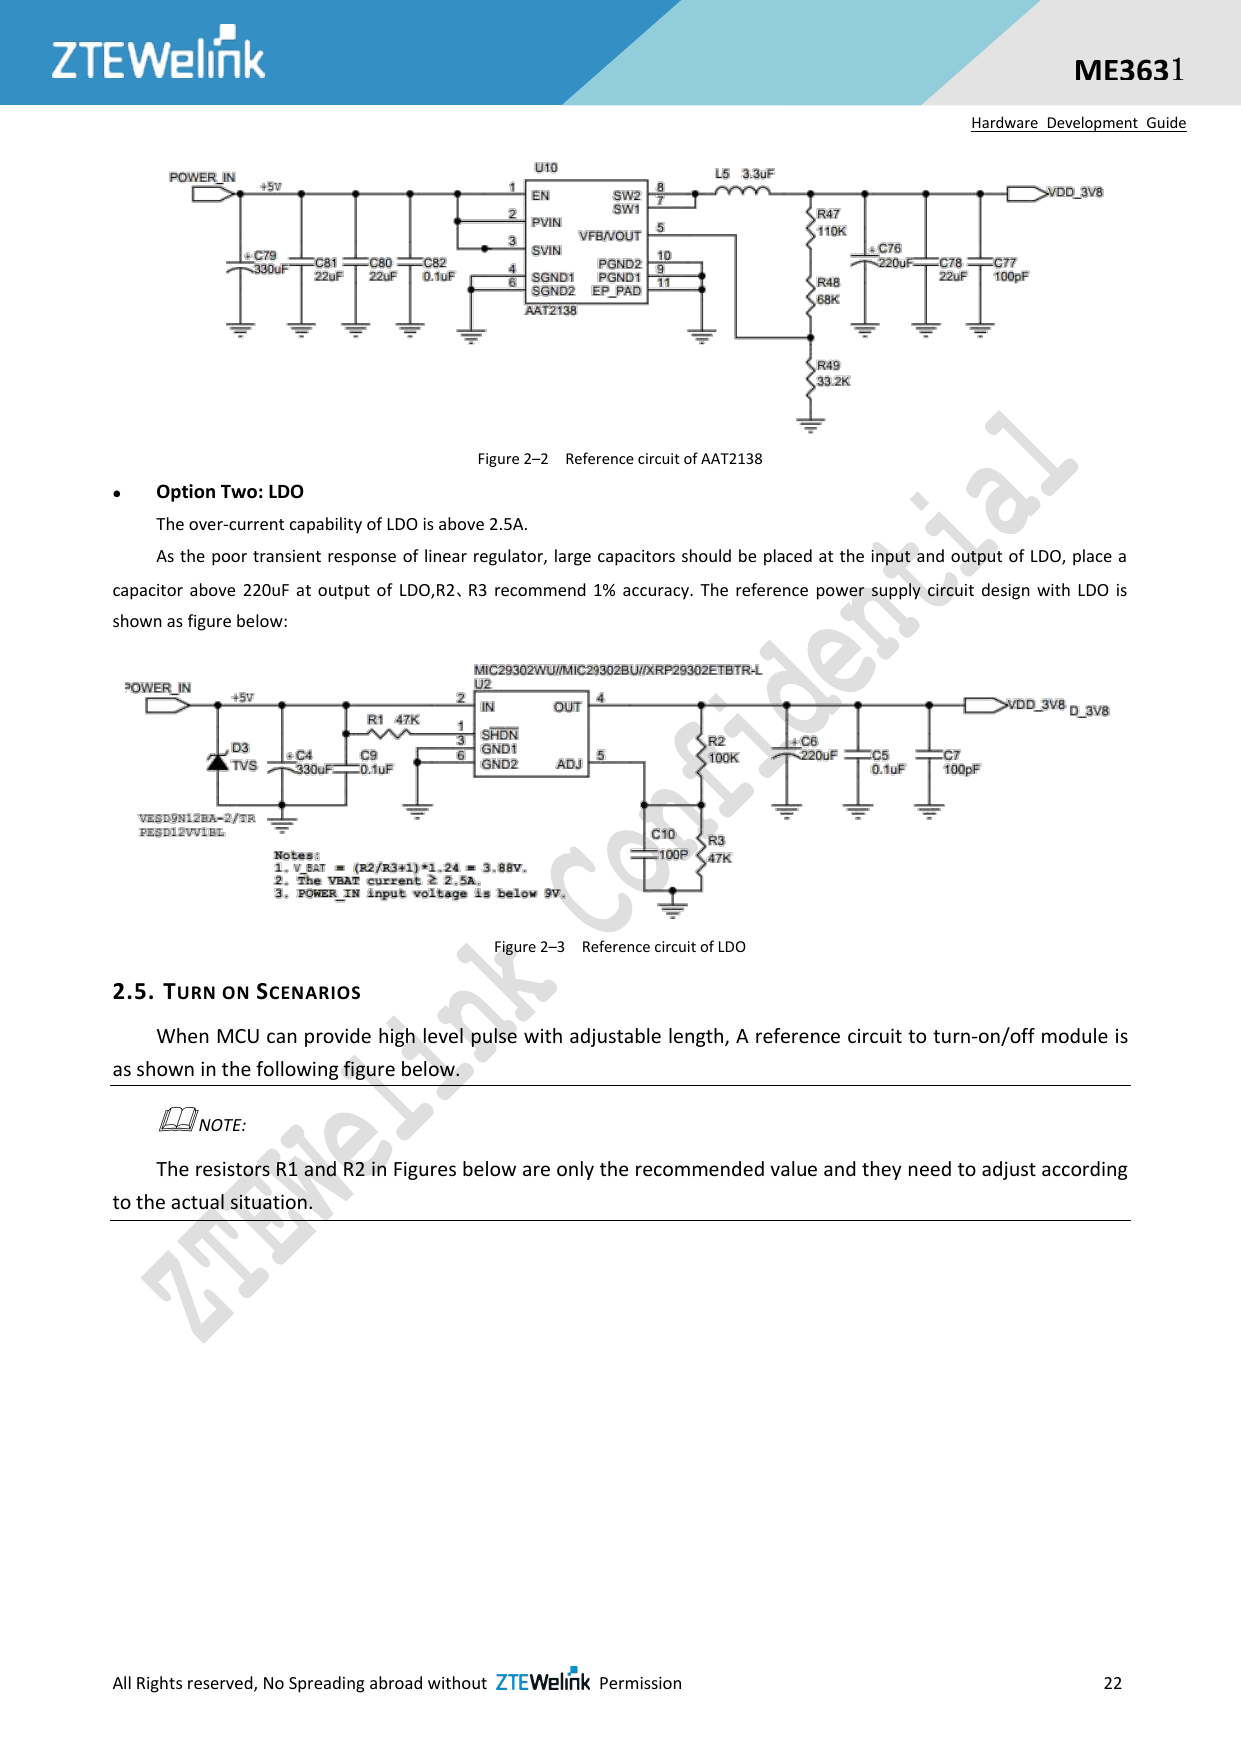  All Rights reserved, No Spreading abroad without    Permission                     22  ME3631 Hardware  Development  Guide  Figure 2–2  Reference circuit of AAT2138  Option Two: LDO   The over-current capability of LDO is above 2.5A.   As the poor transient response of linear regulator, large capacitors should be placed at the input and output of LDO, place a capacitor  above  220uF  at  output  of  LDO,R2、R3  recommend  1%  accuracy.  The  reference  power  supply  circuit  design  with  LDO  is shown as figure below:            Figure 2–3  Reference circuit of LDO 2.5. TURN ON SCENARIOS When MCU can provide high level pulse with adjustable length, A reference circuit to turn-on/off module is as shown in the following figure below.  NOTE:   The resistors R1 and R2 in Figures below are only the recommended value and they need to adjust according to the actual situation.  